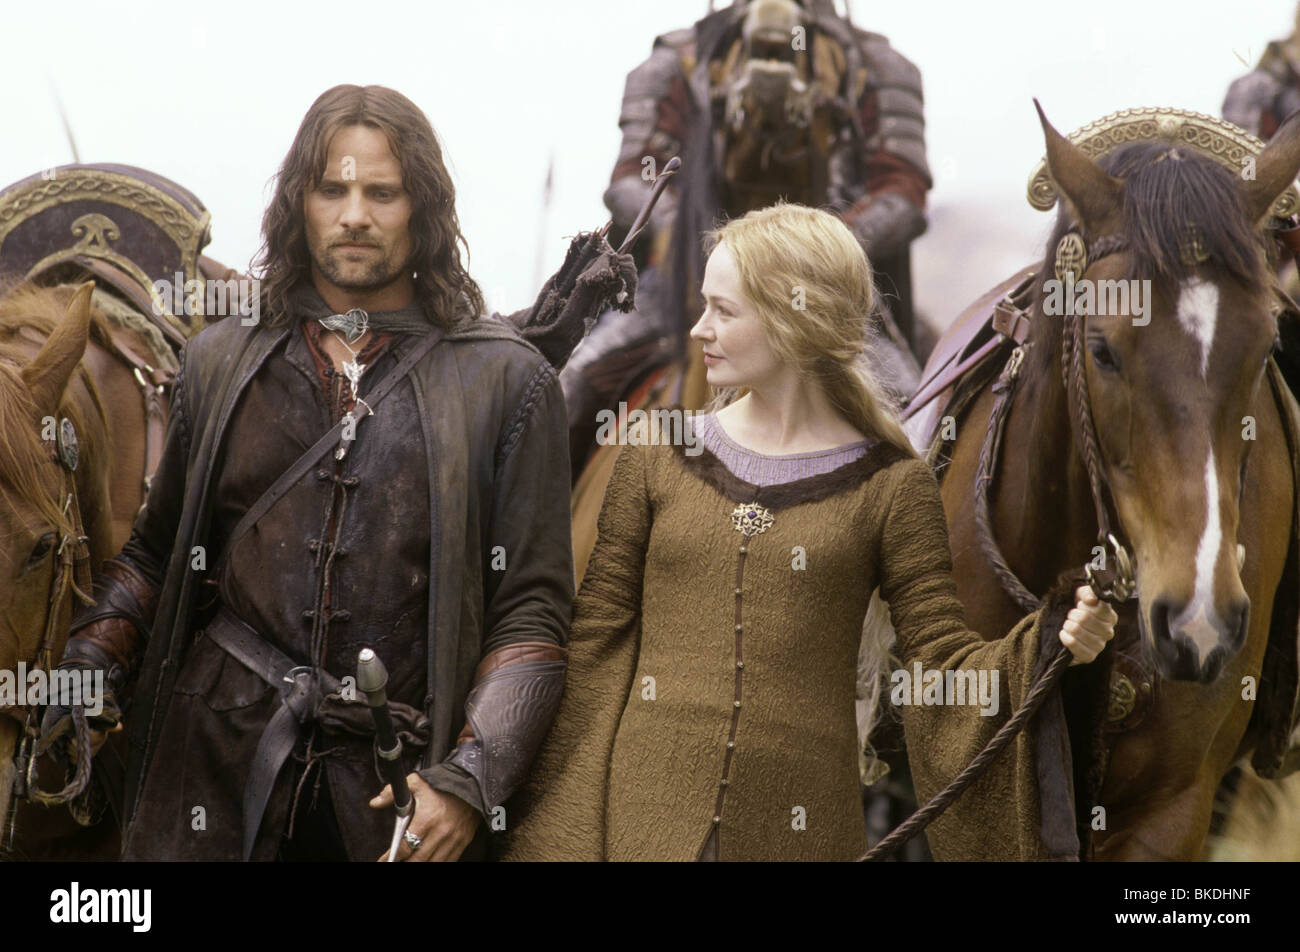 THE LORD OF THE RINGS: THE TWO TOWERS (2002) VIGGO MORTENSEN, ARAGORN, MIRANDA OTTO, EOWYN TWRS 002 567 Stock Photo